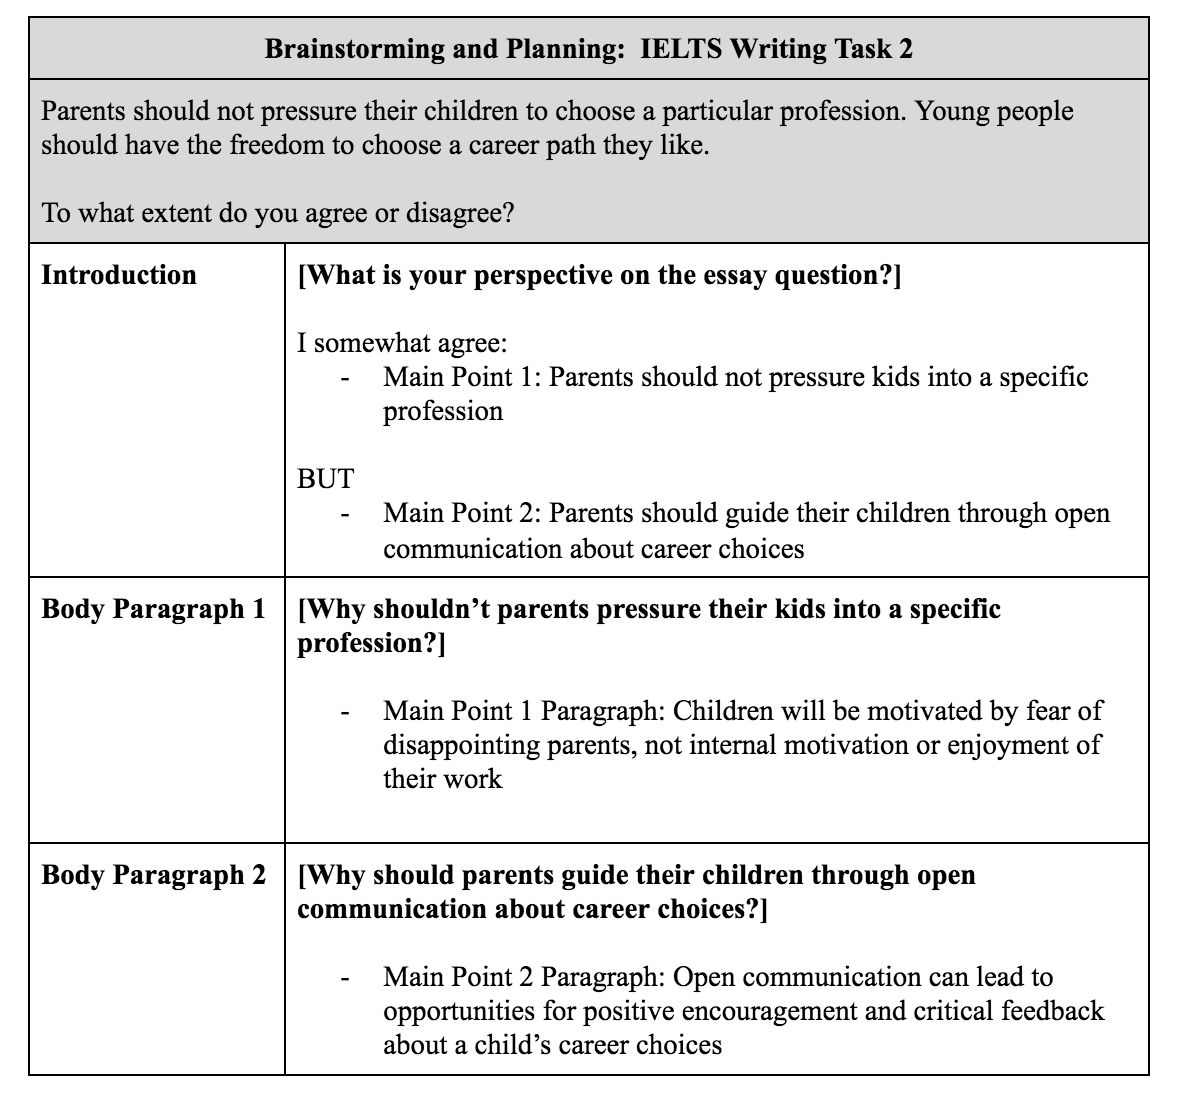 ielts writing task 2 compare and contrast essay